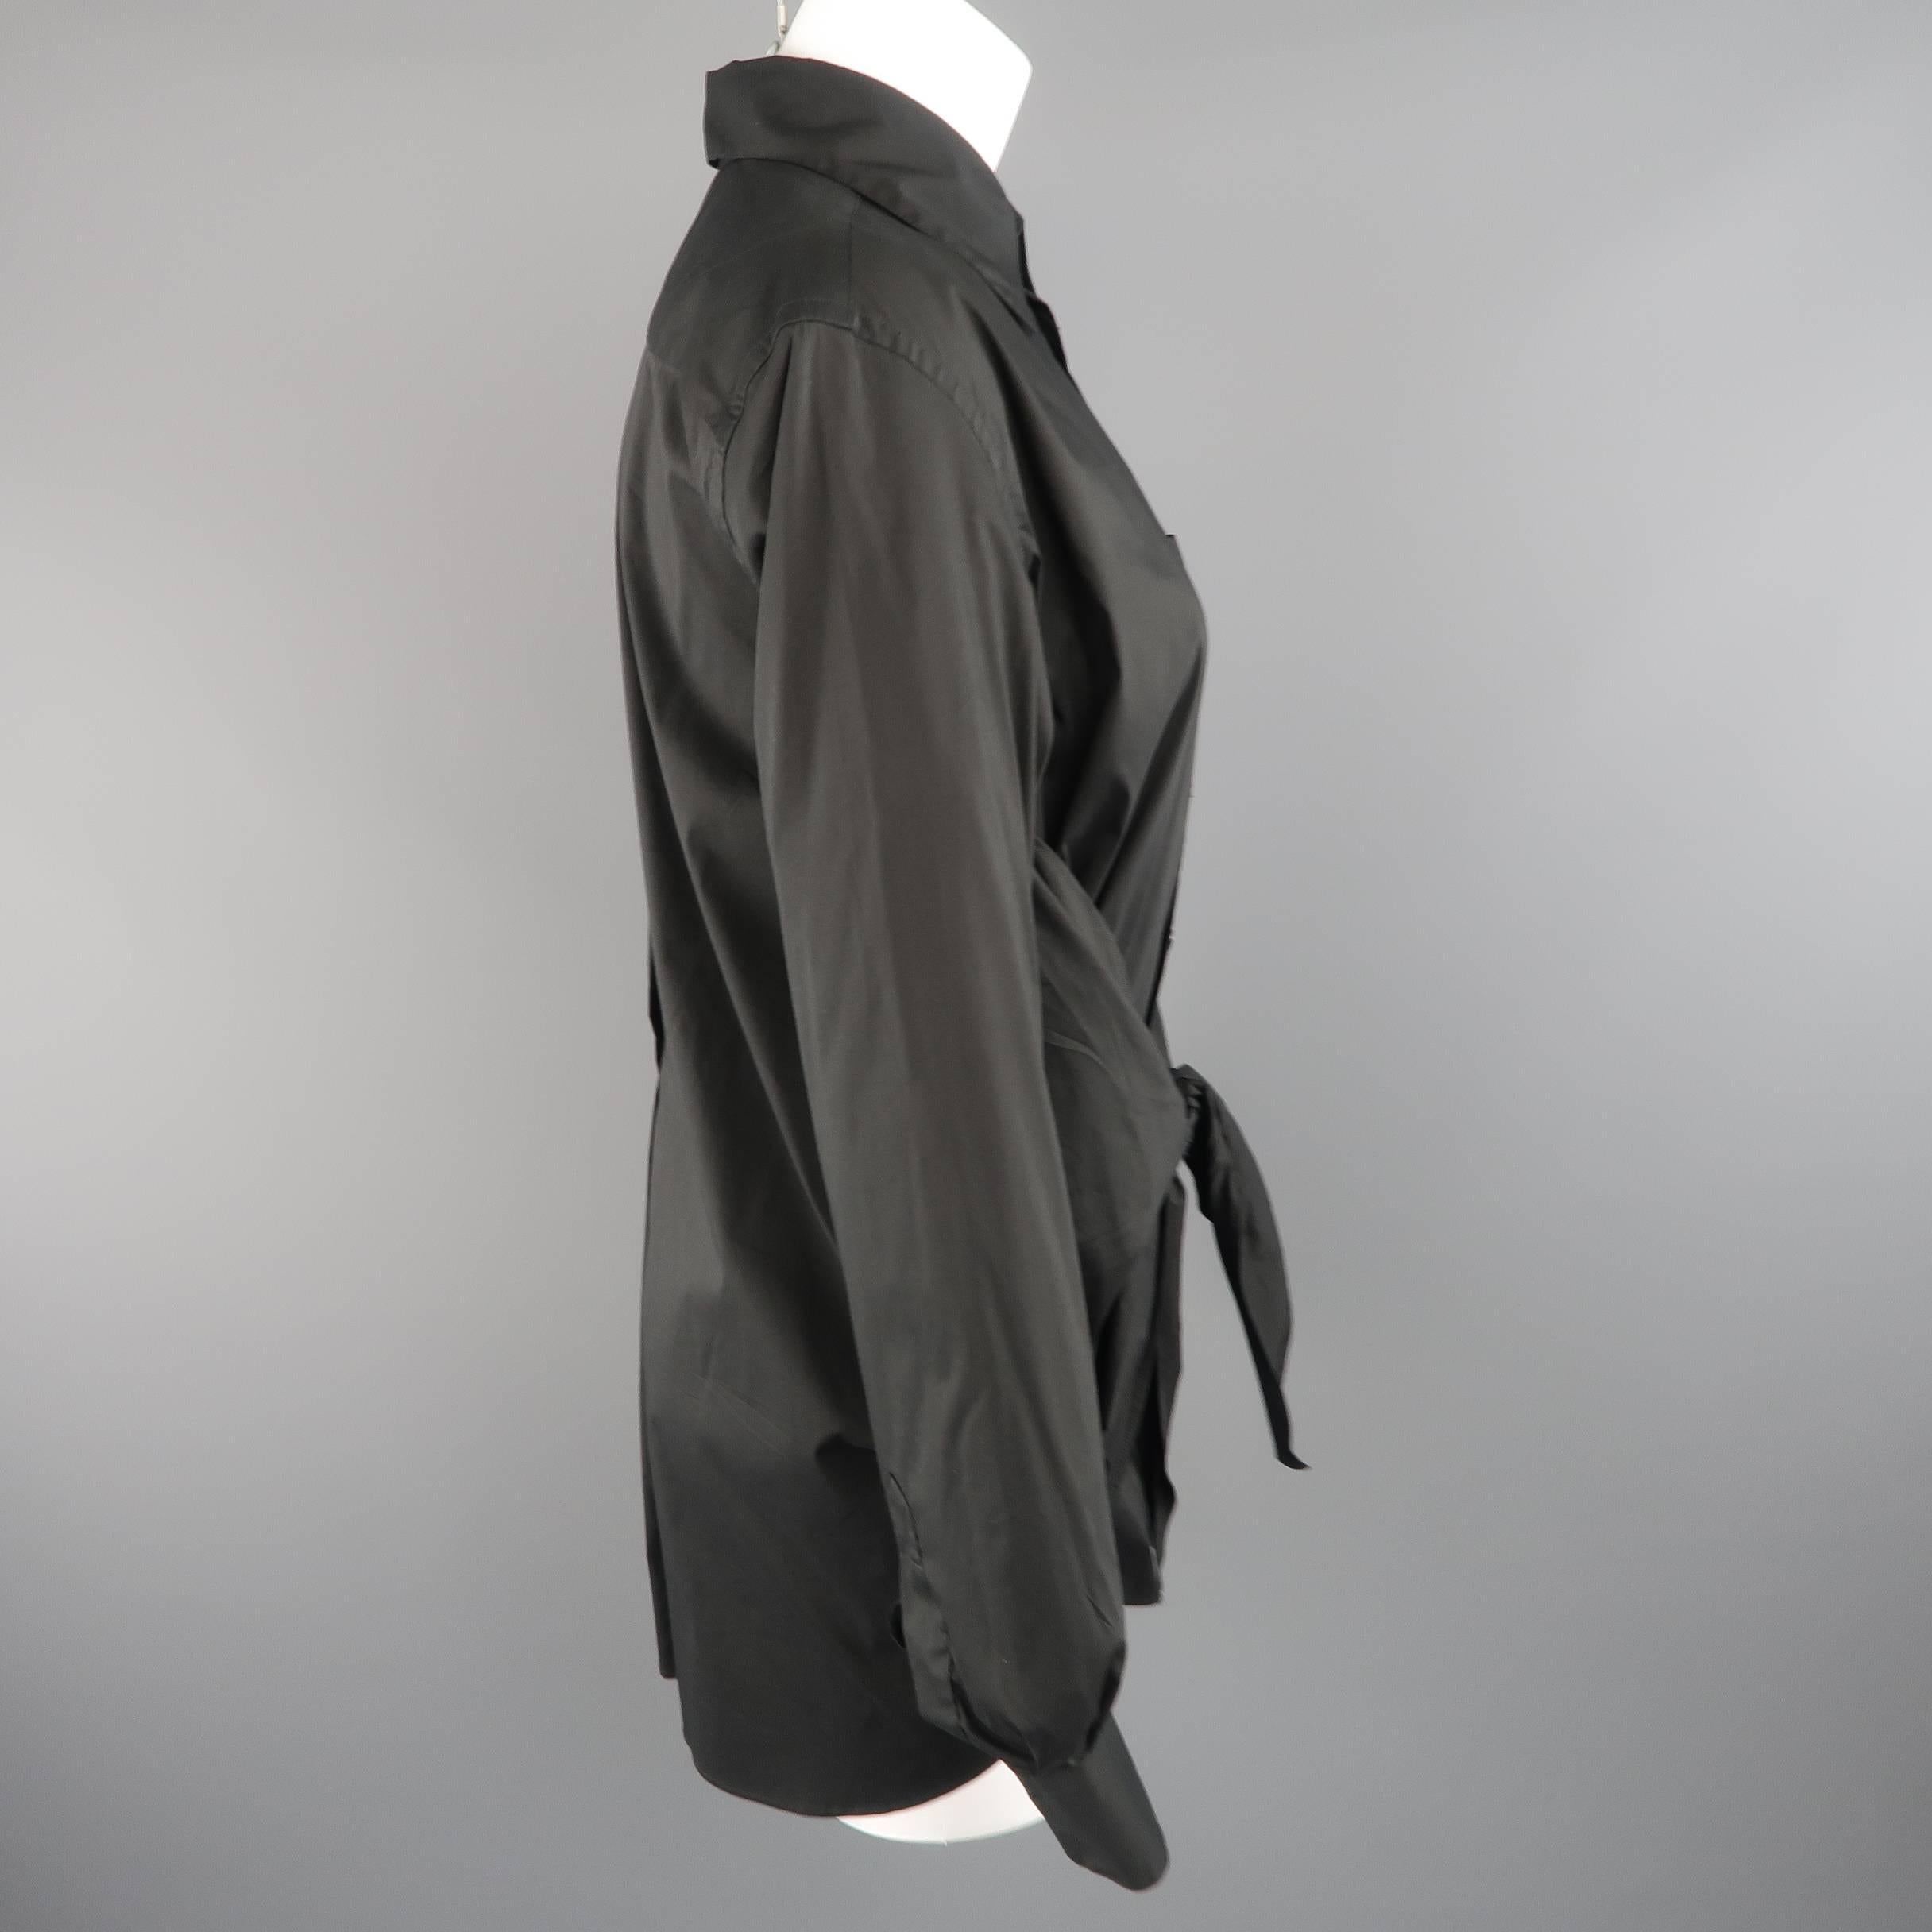 Women's Jean Paul Gaultier Size M Black Tied Front Collared Shirt